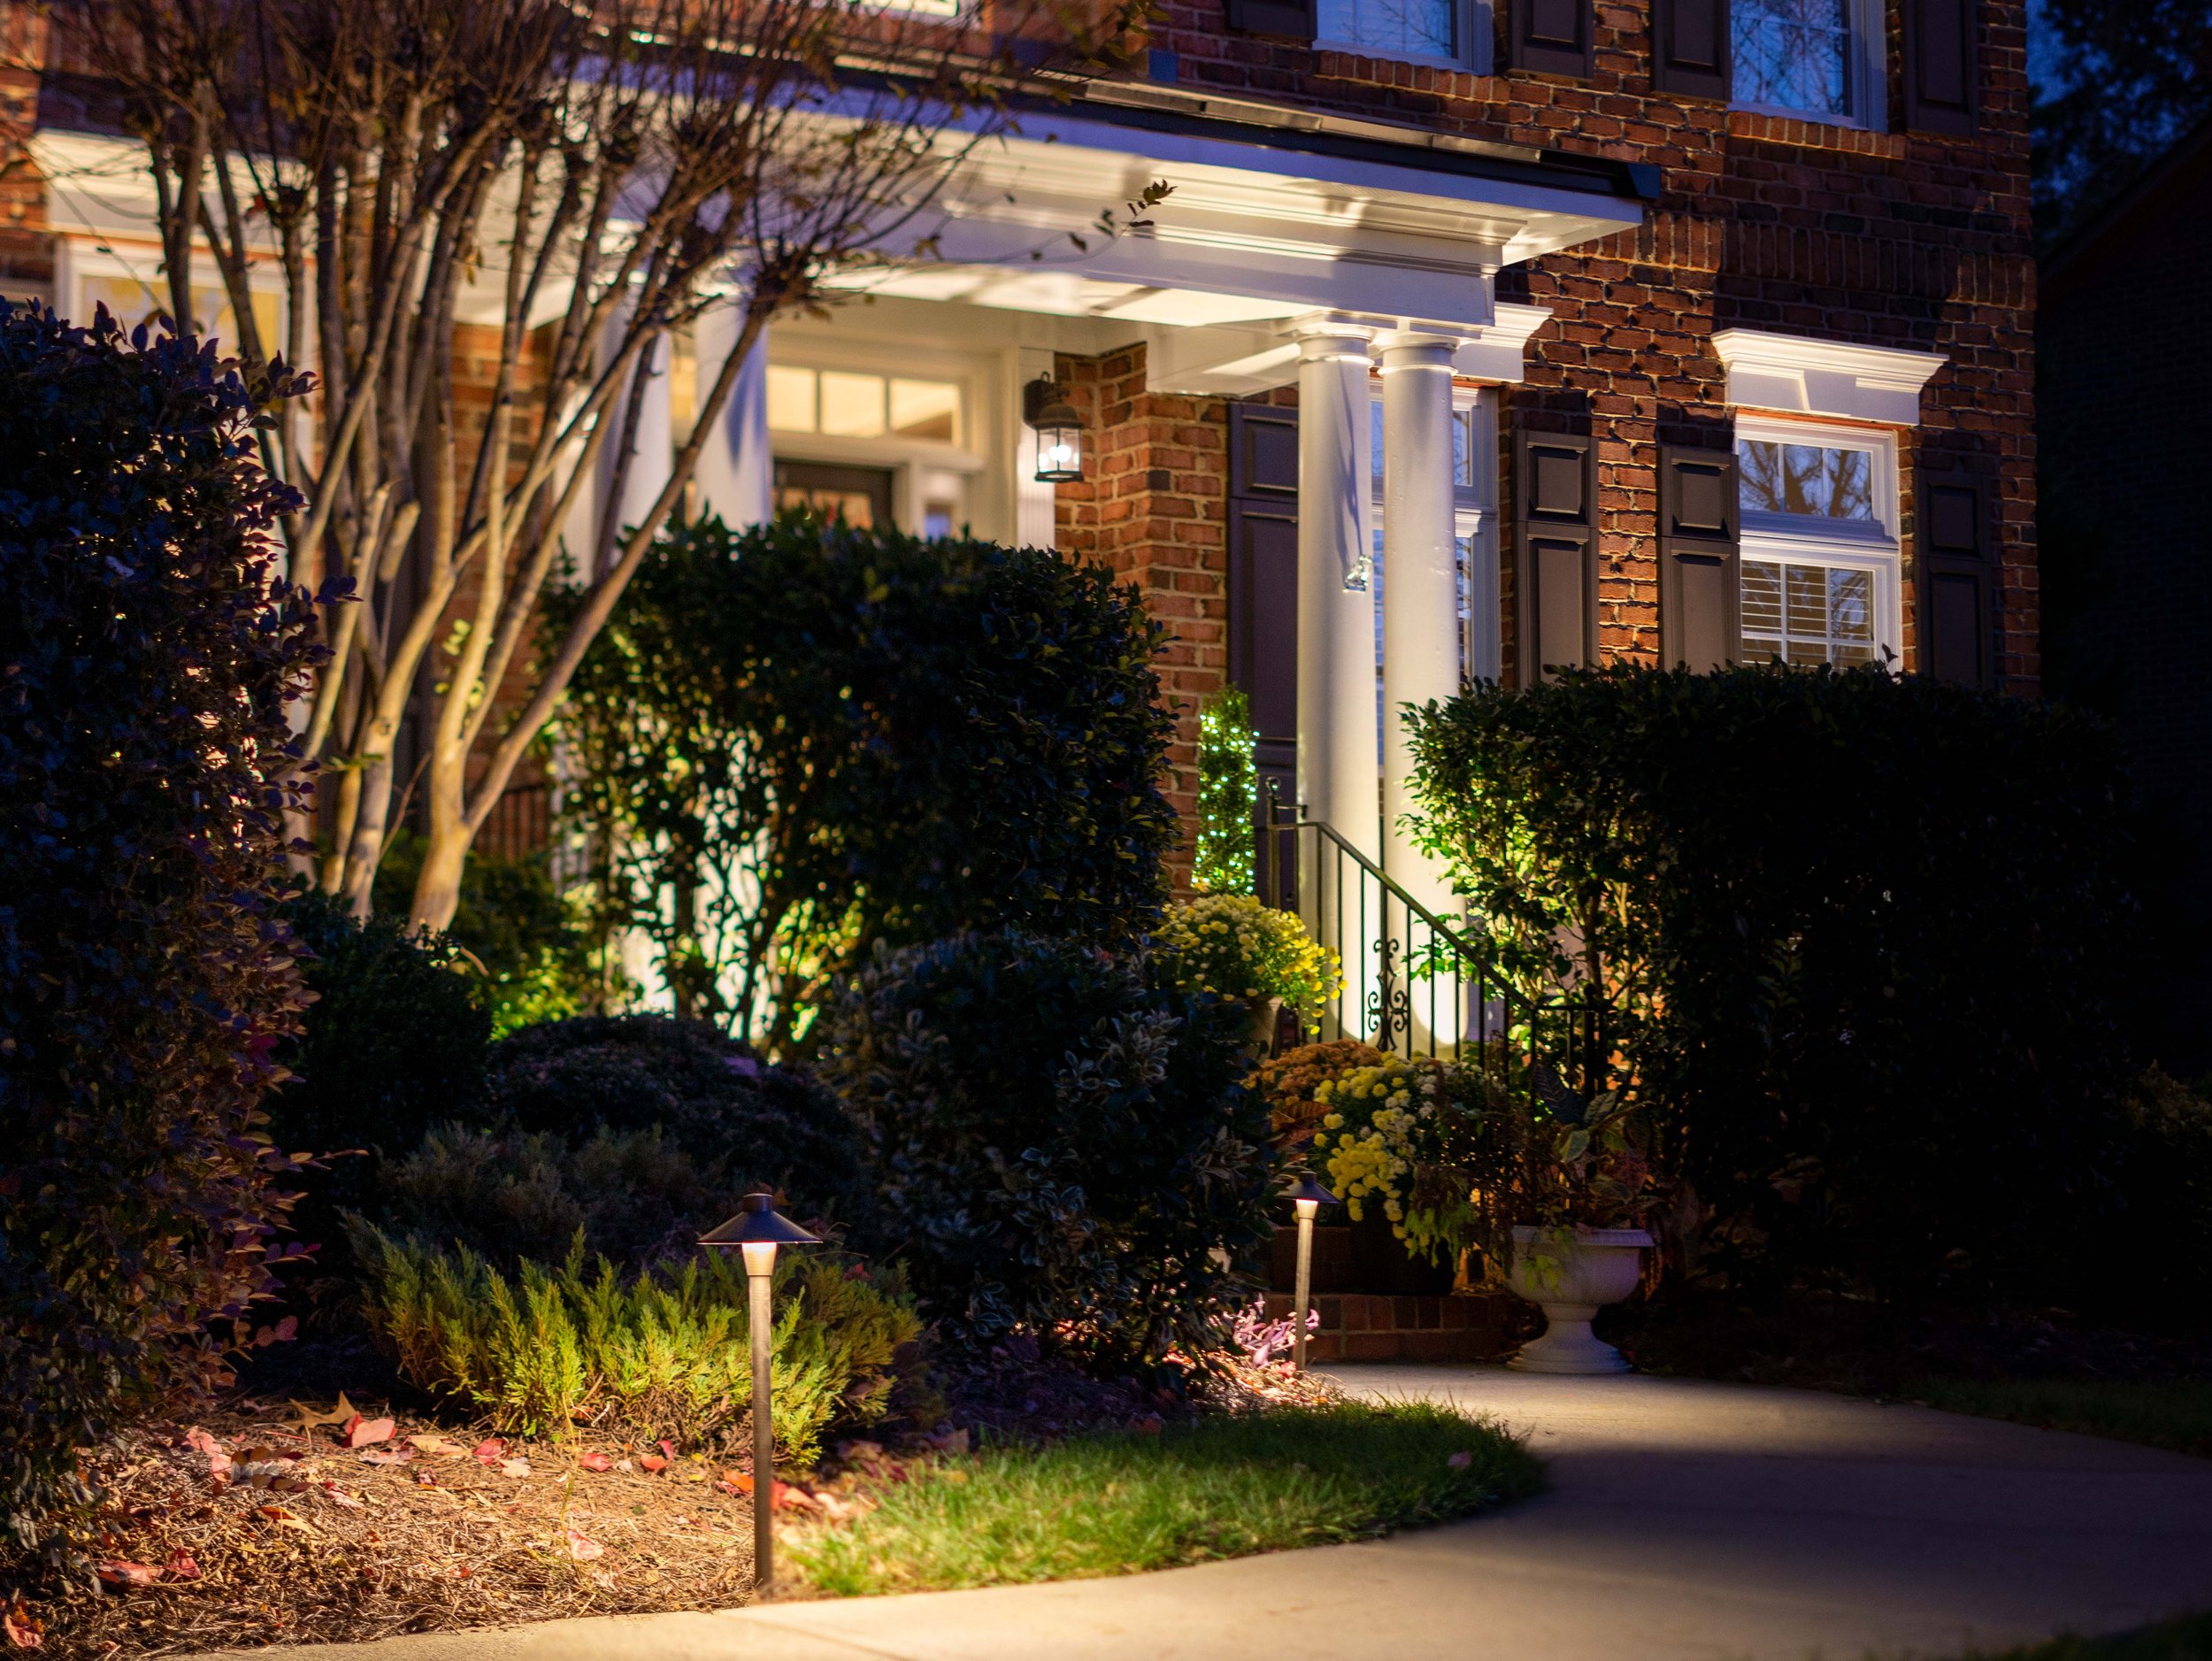  Red brick home with black shudders and white columns is illuminated with a combination of architectural lighting, landscape lighting, and navigational lighting.  